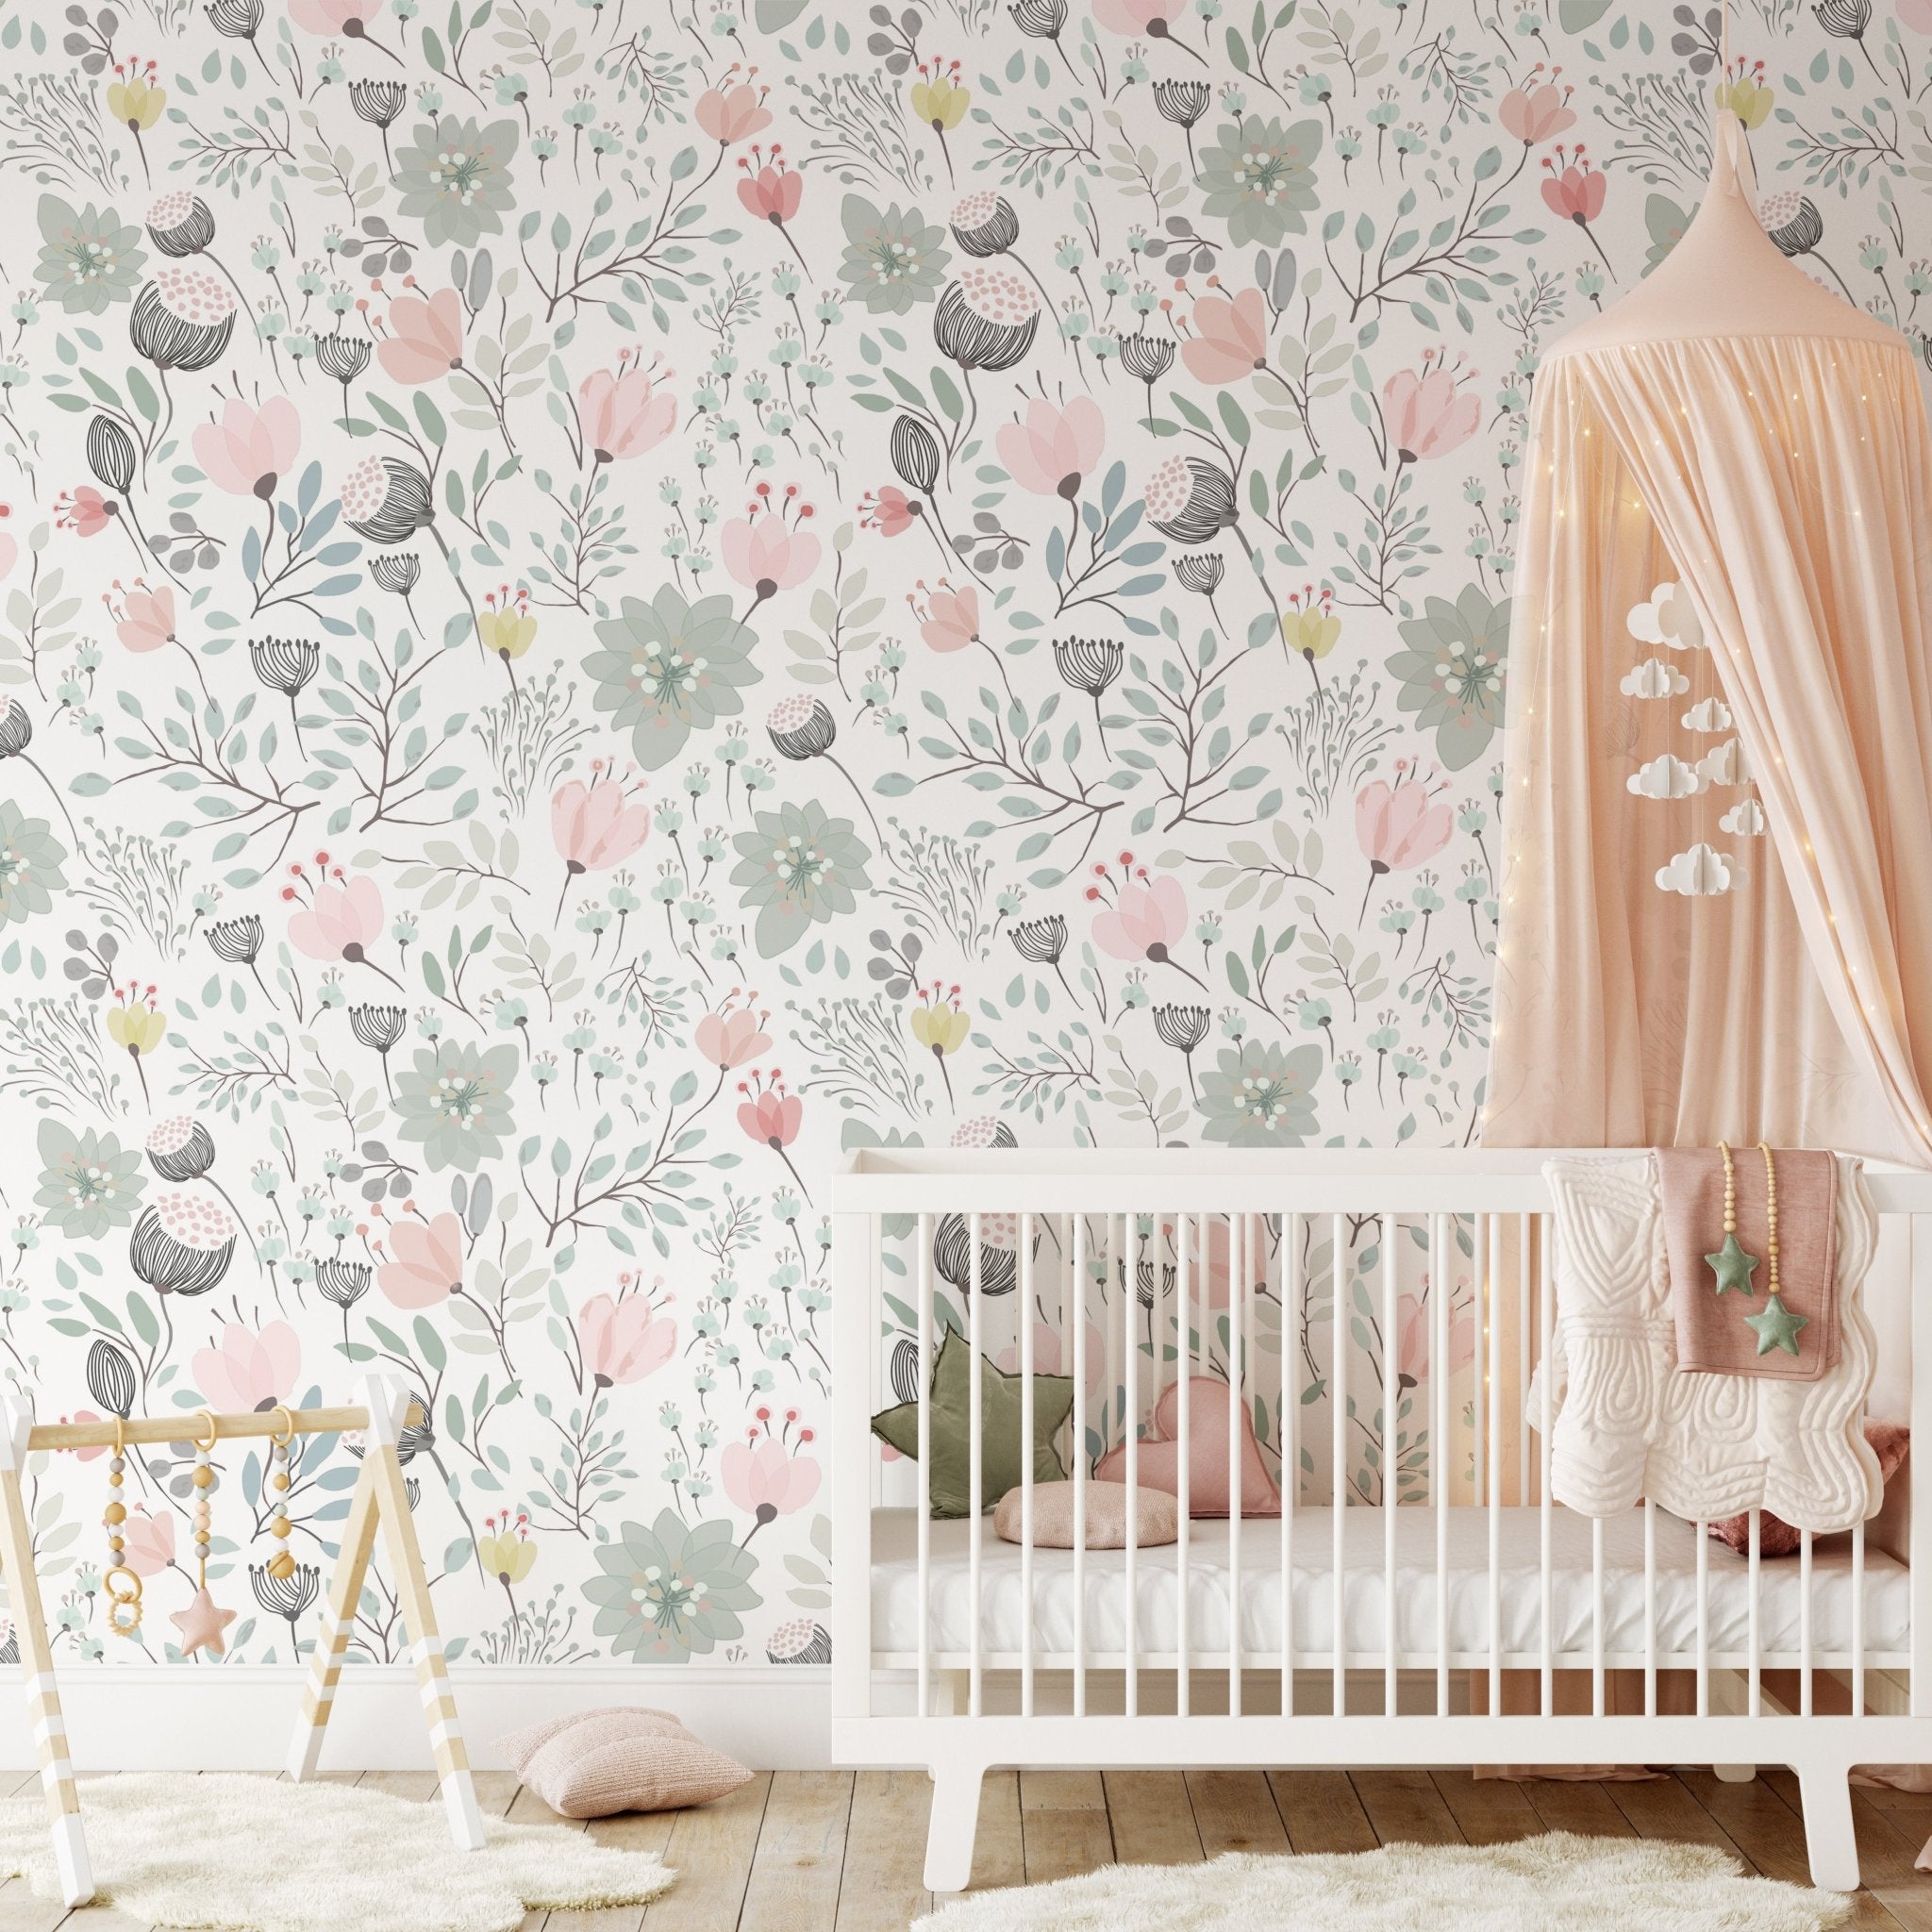 Grey Vintage Floral Wallpaper - Peel and Stick - The Wallberry